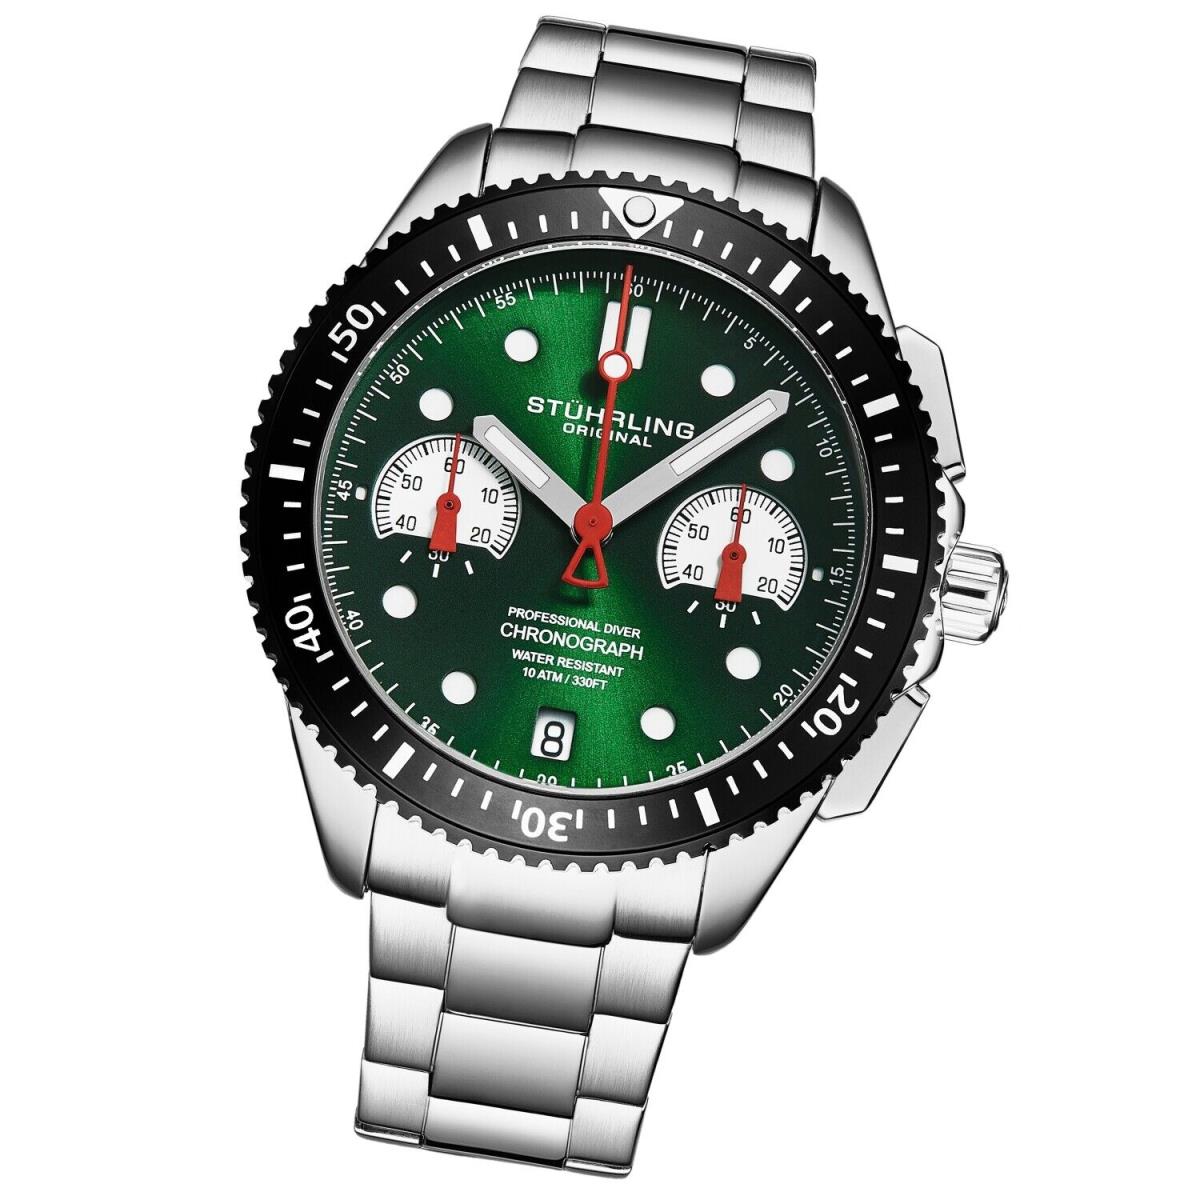 Stuhrling 4016 3 Quartz Chronograph Date Green Dial Stainless Steel Mens Watch